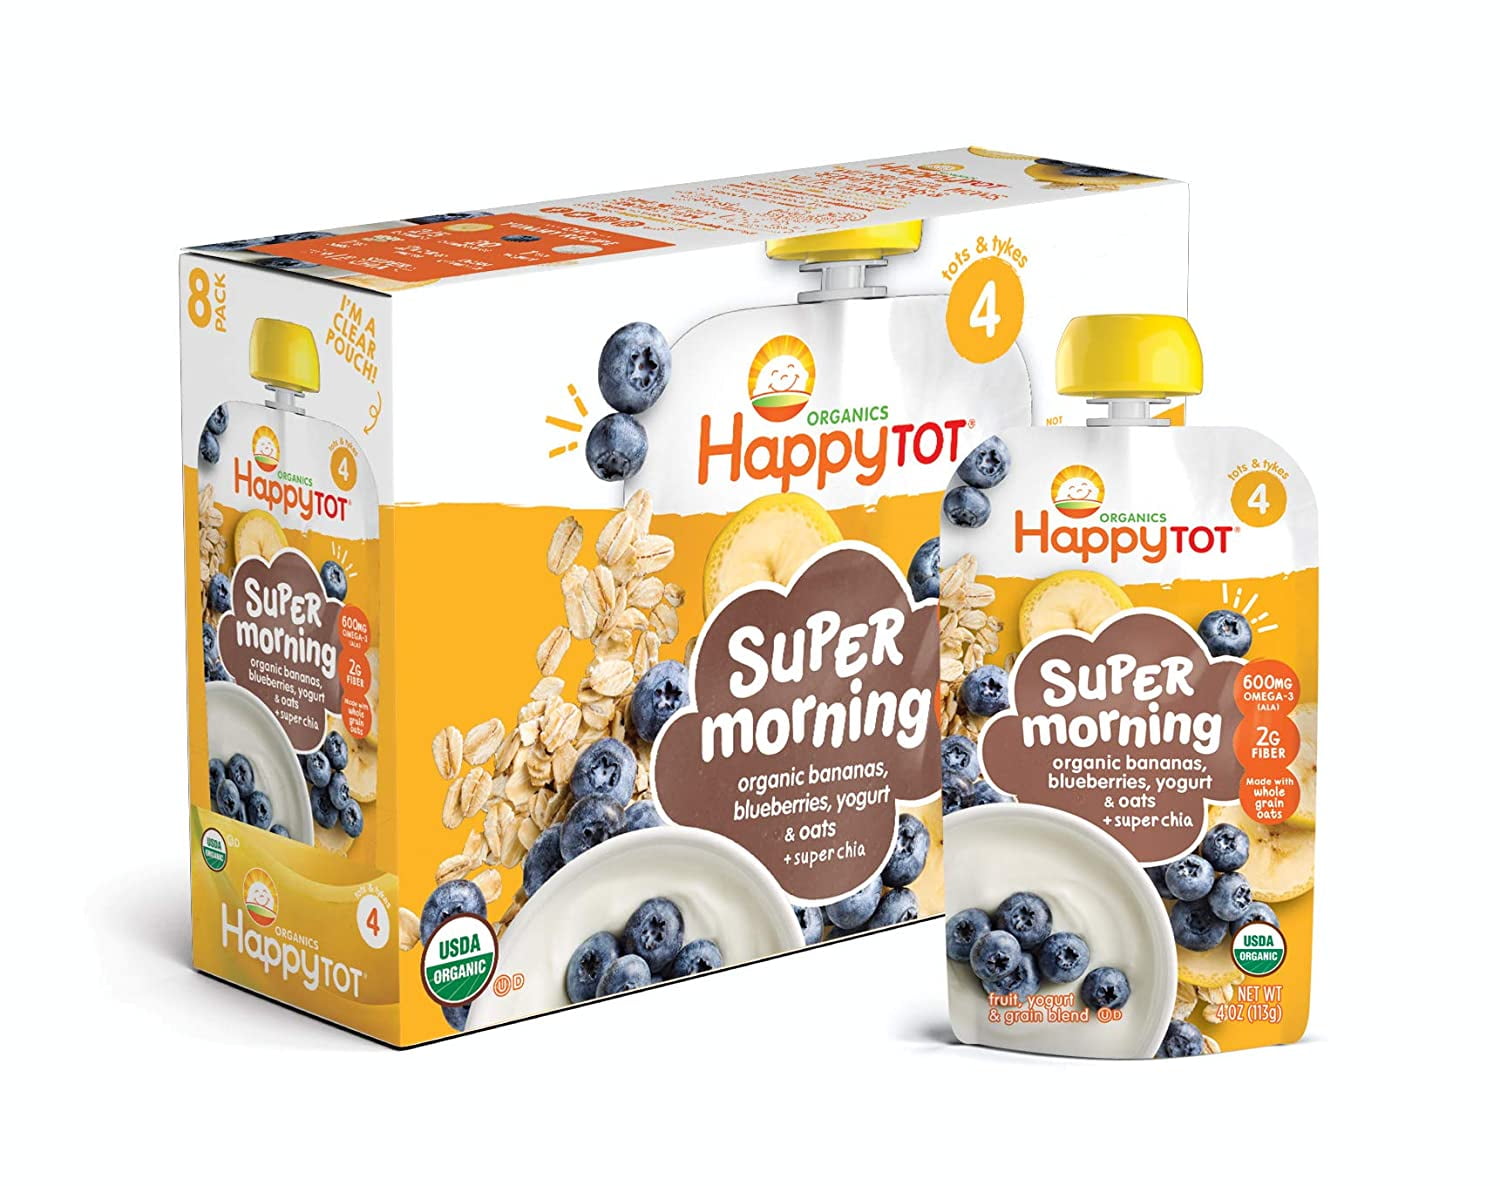  Happy Home Premium Natural Blueberry Flavor - Certified  Kosher, 4 oz. : Grocery & Gourmet Food